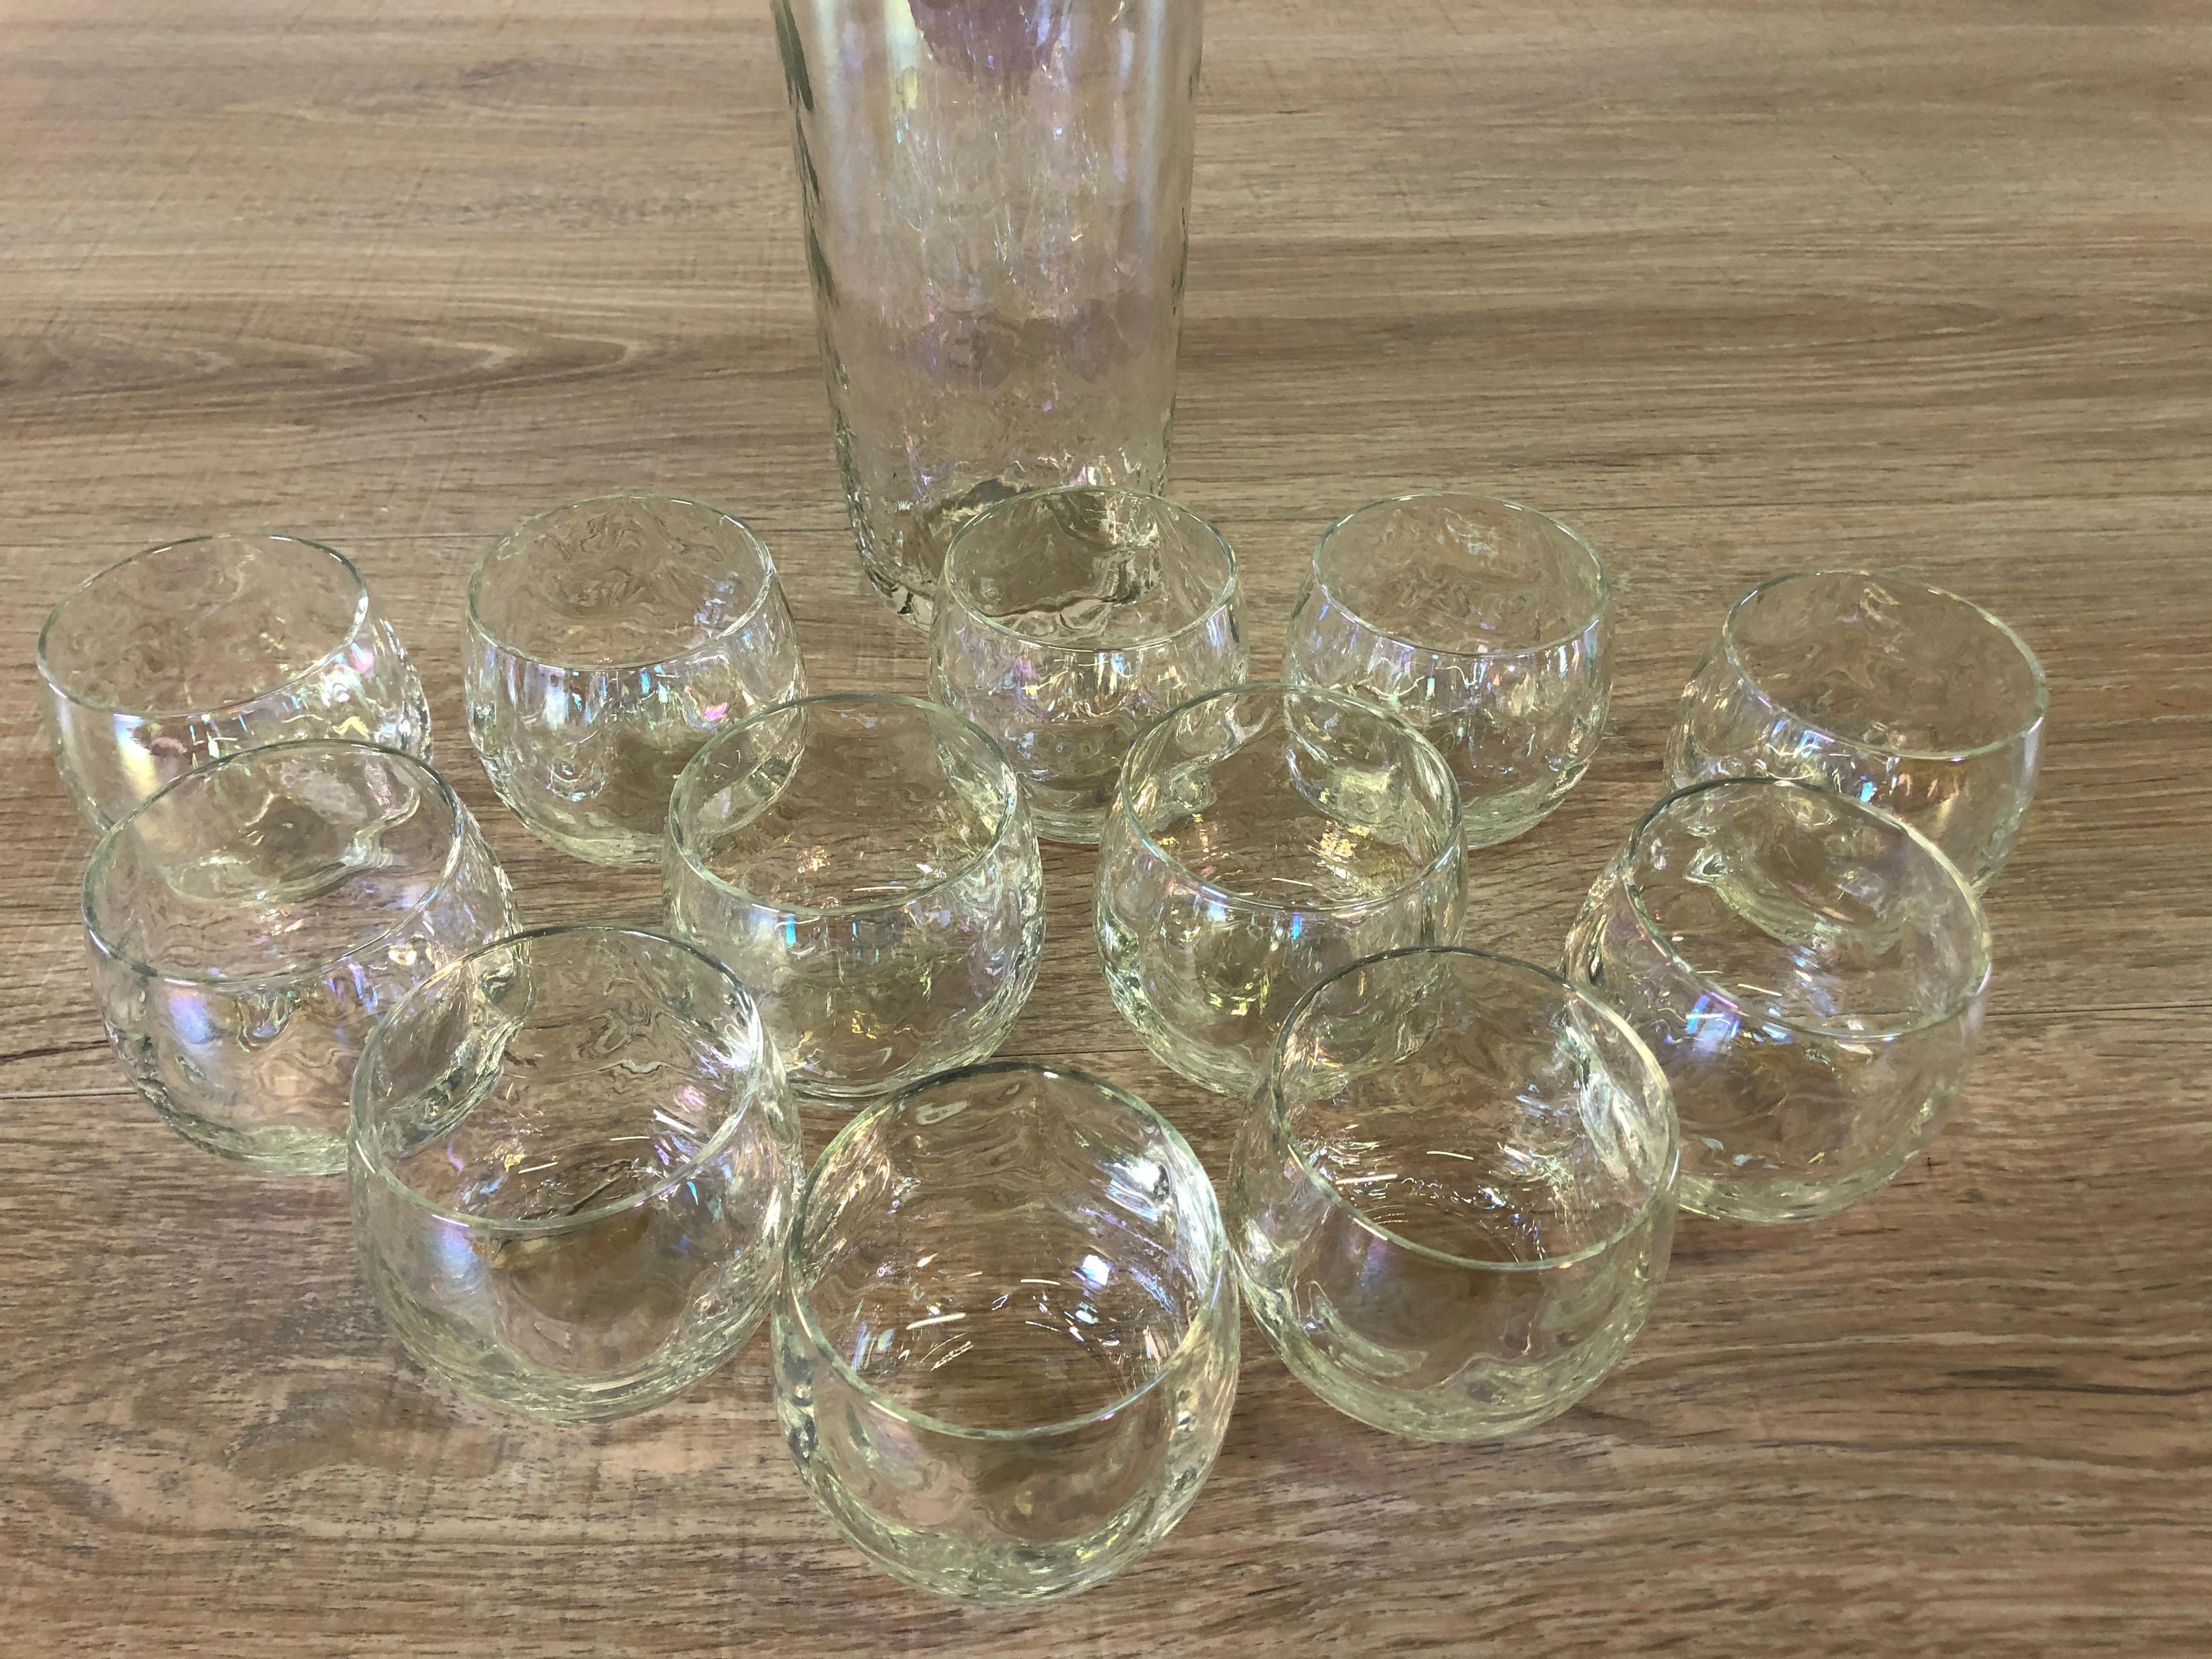 Vintage 1960s set of 13 iridescent cocktail shaker and 12 roly poly style tumblers. The tumblers measure 2.5” diameter 2.5” height. The shaker has a chrime lid in excellent condition. No marks.